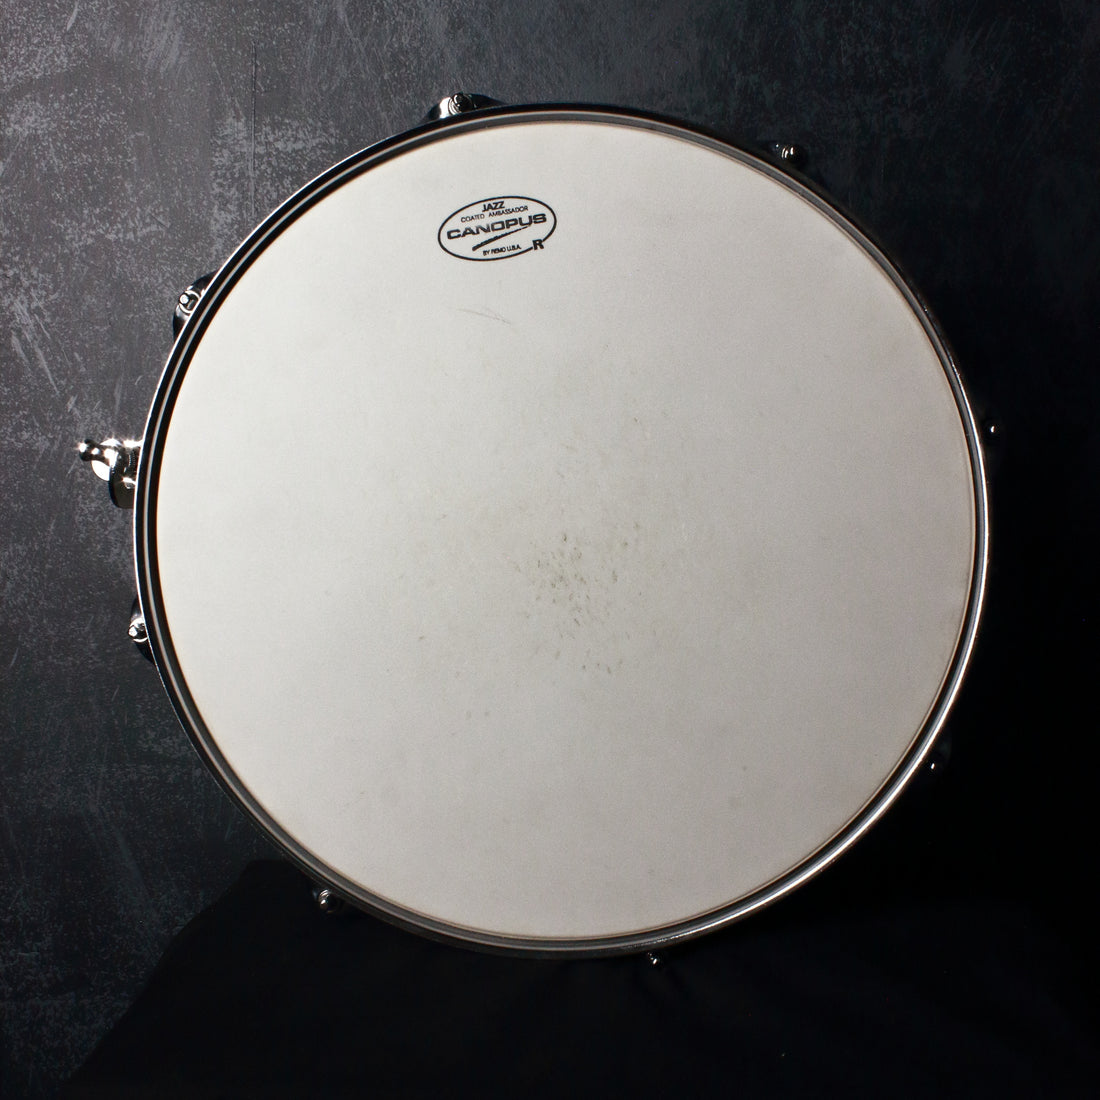 Canopus Limited Release STM-1455 Maple Snare Drum in Vintage Pearl